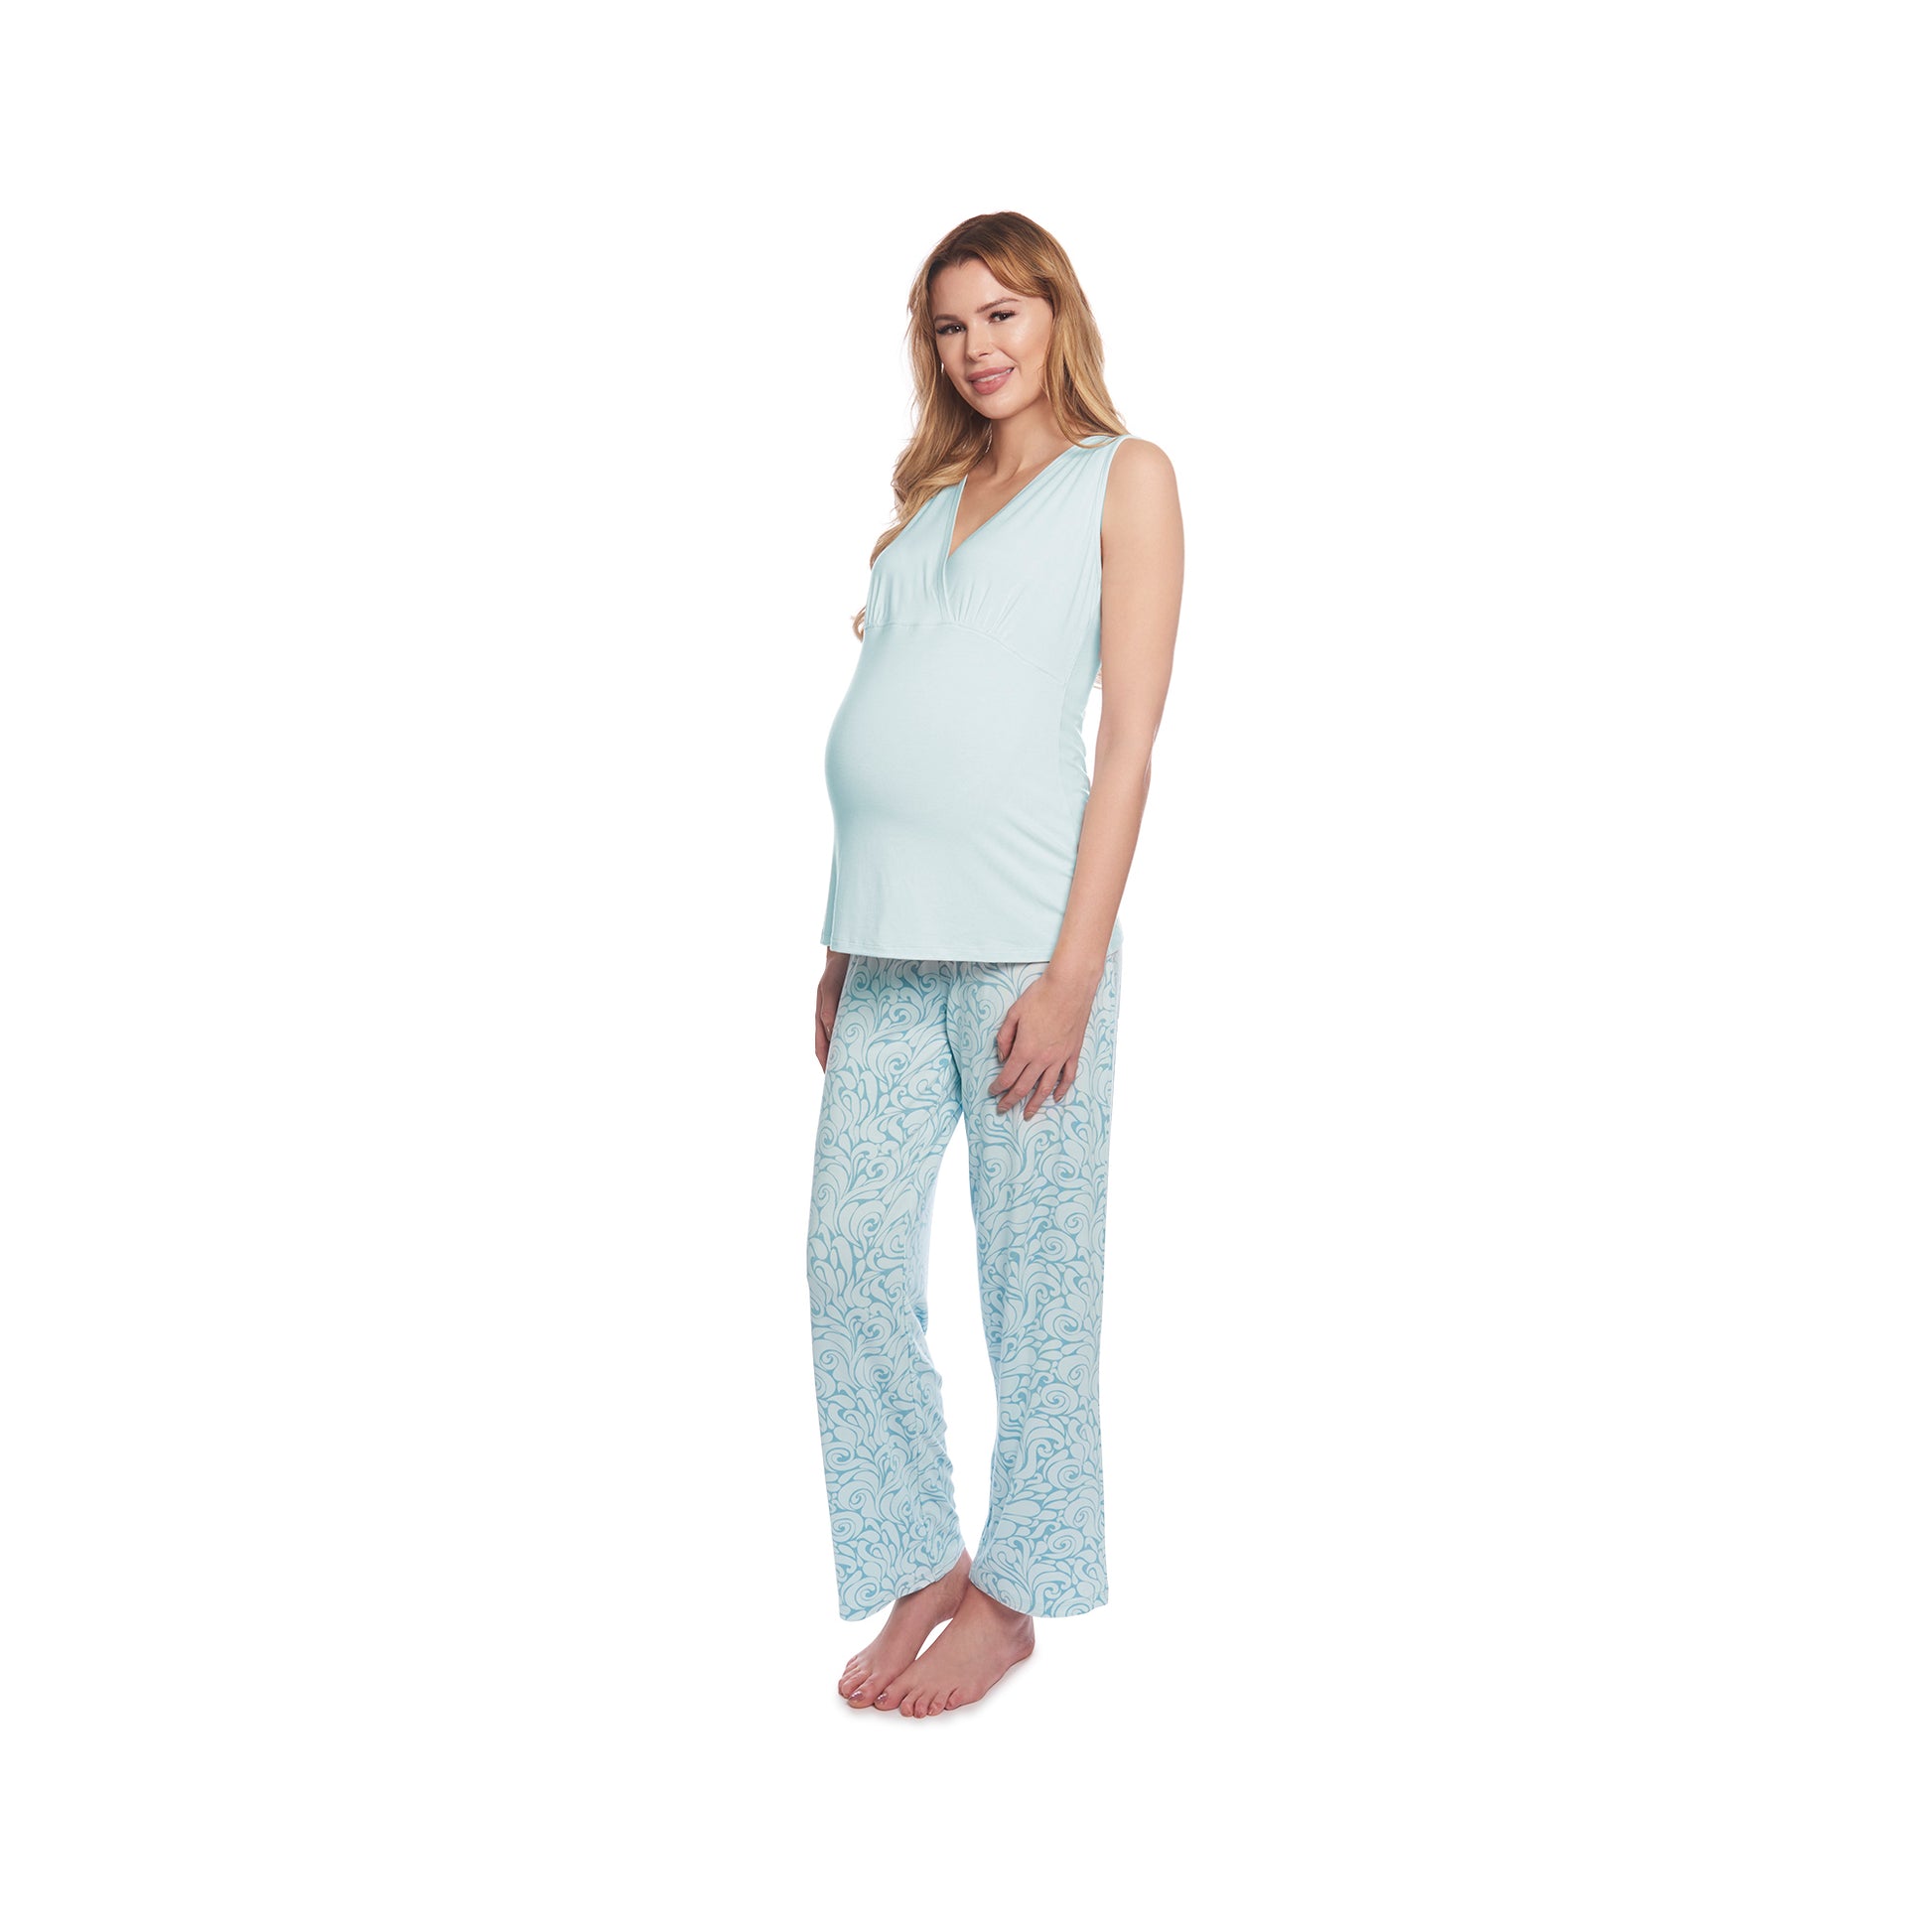 Waves Analise 5-Piece Set, pregnant woman wearing criss-cross bust tank top and pant.